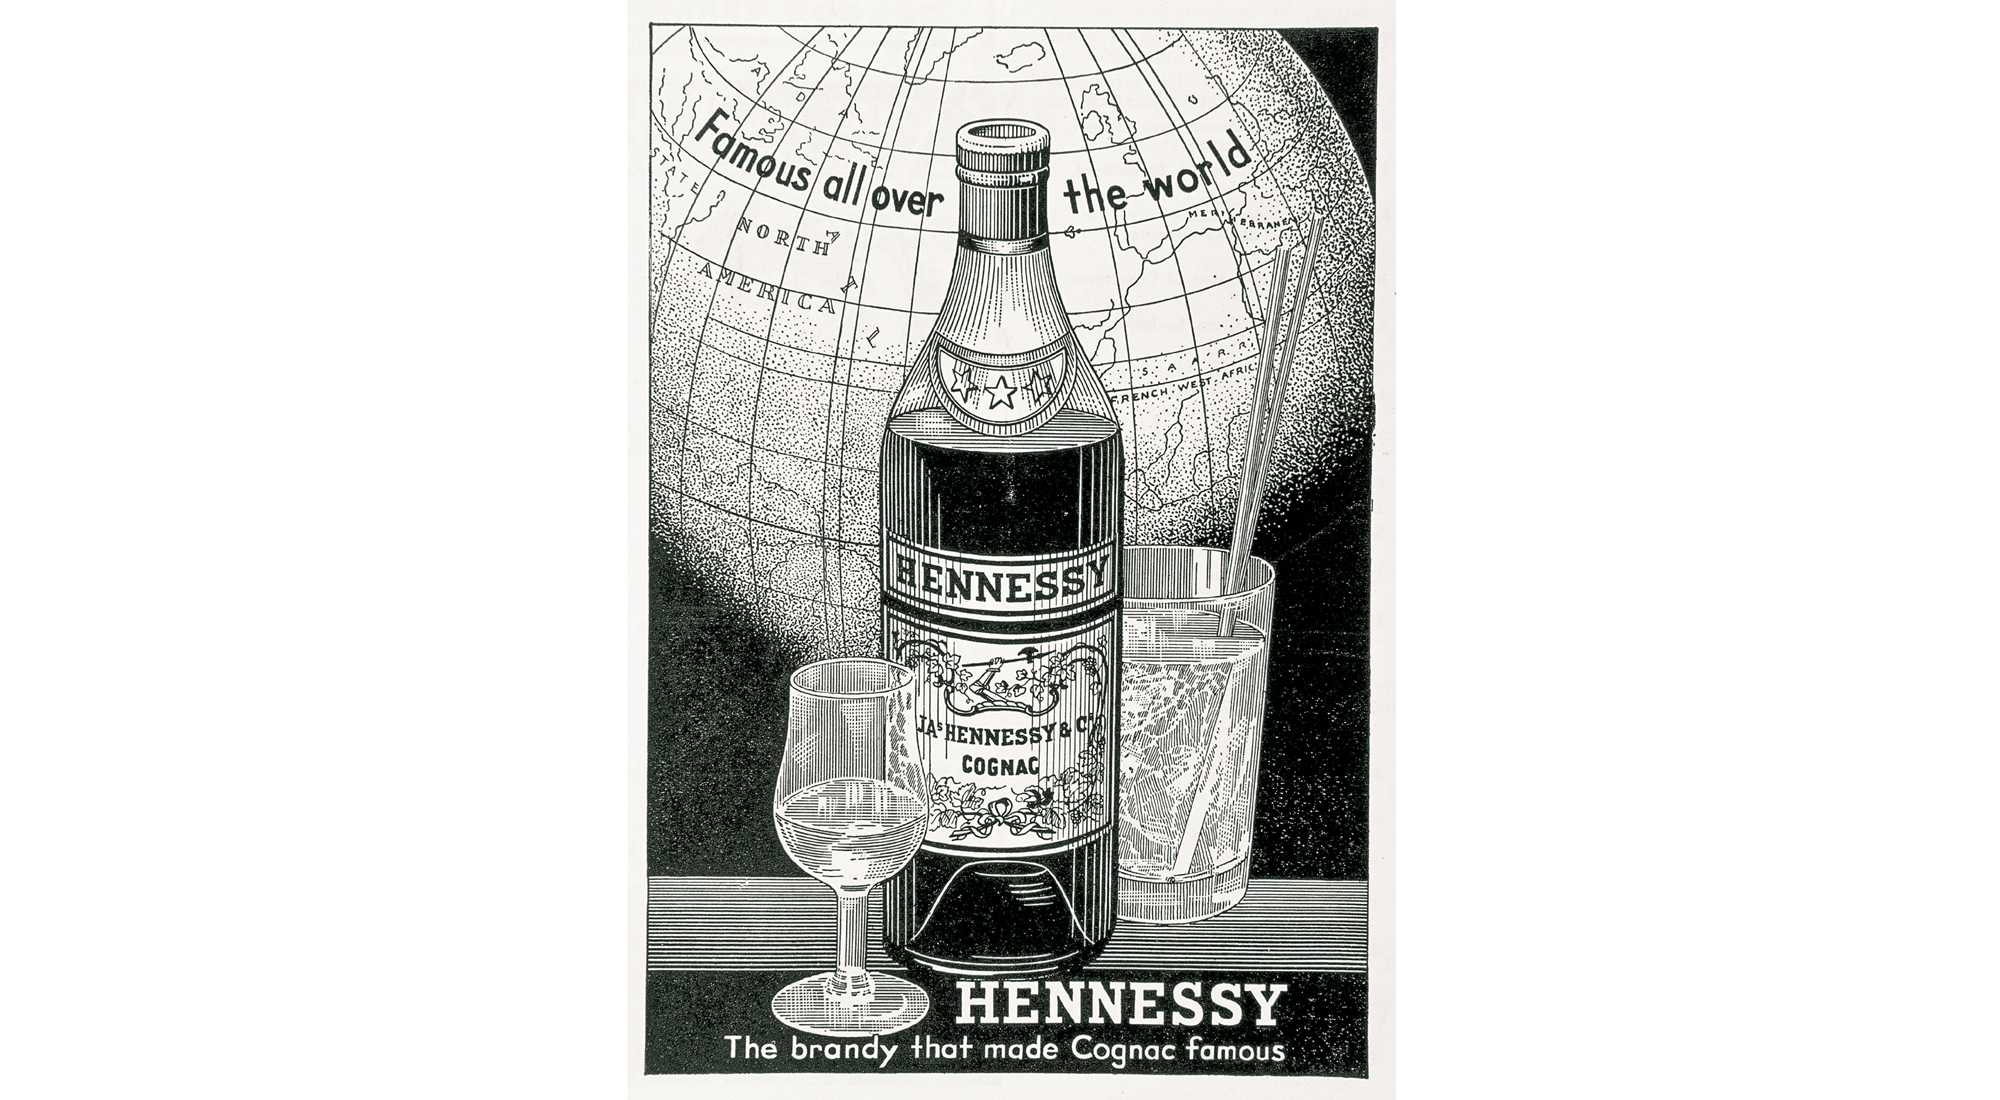 Bringing the French Art of Living to Moët Hennessy's New Champagne